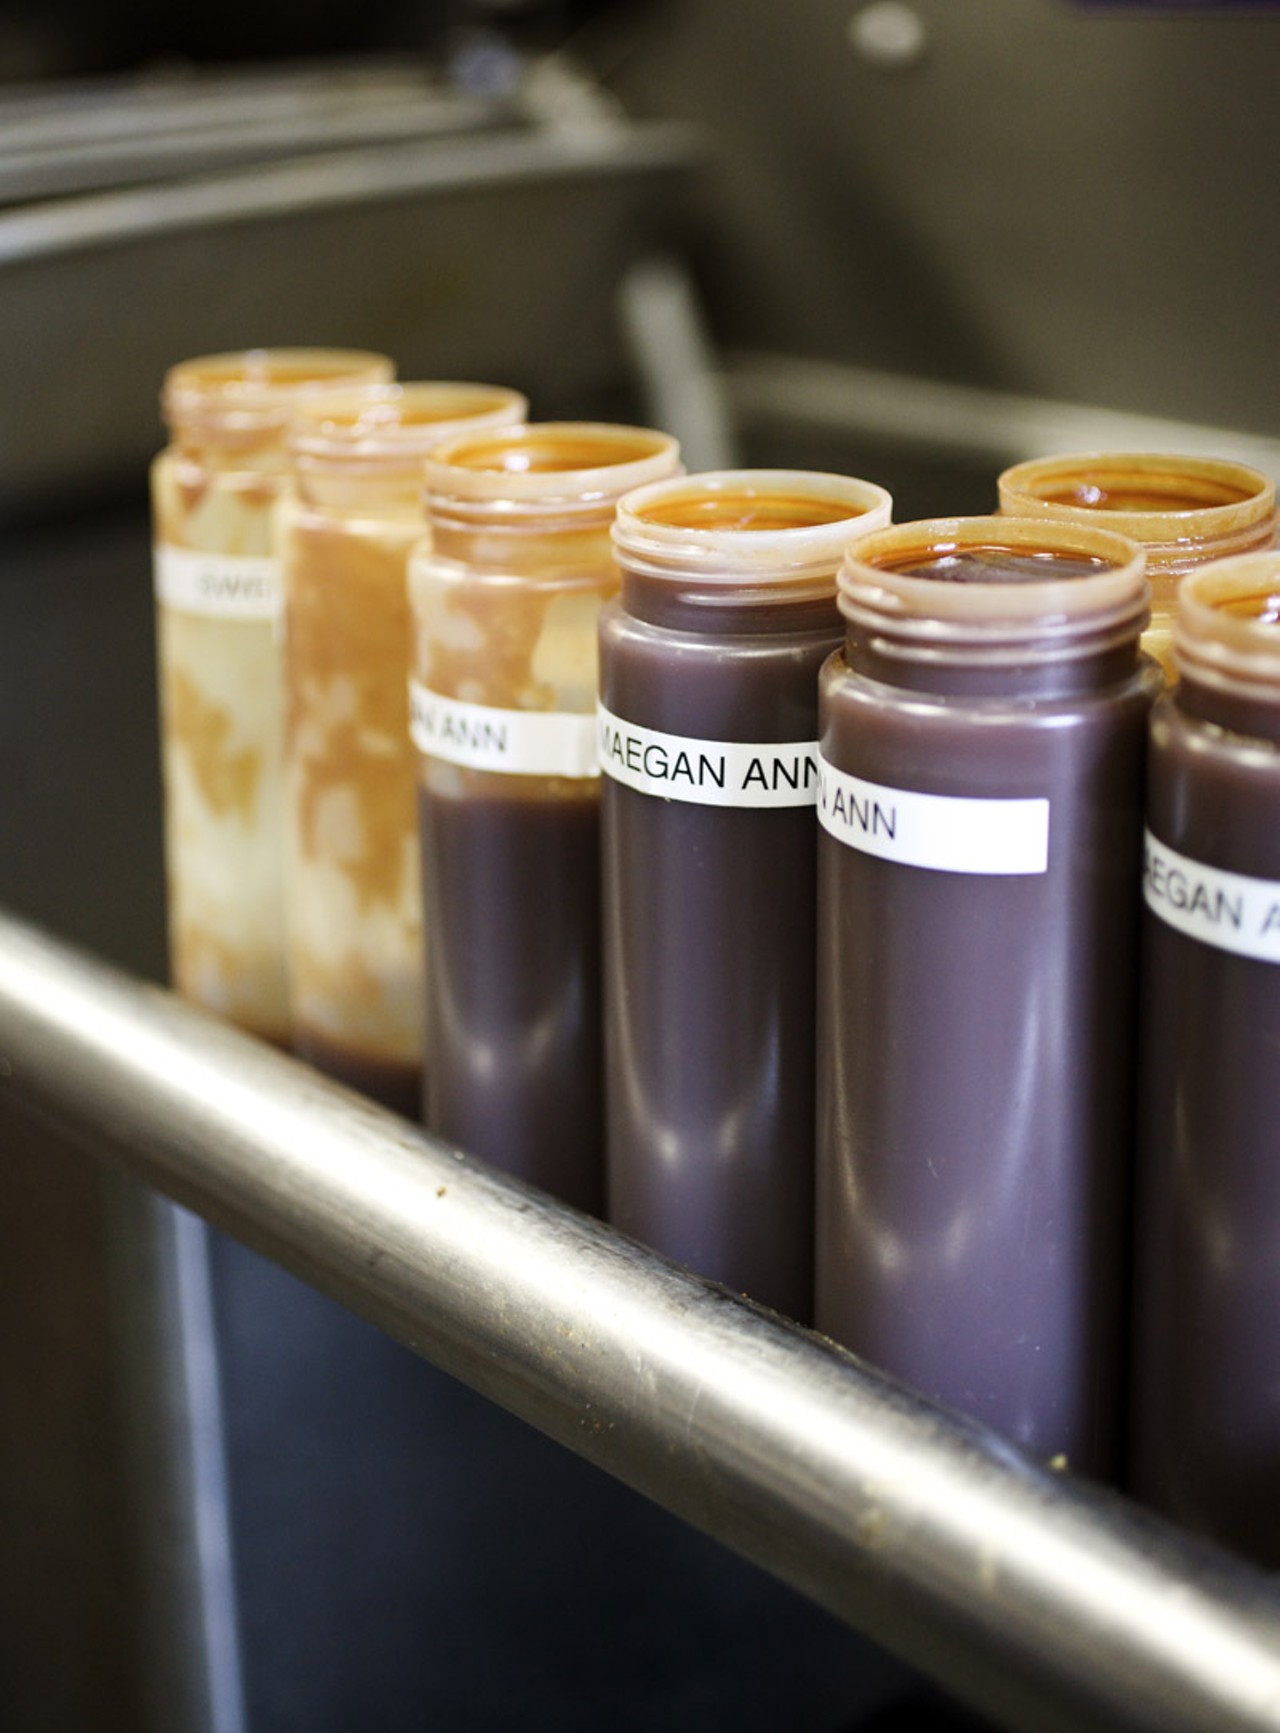 Sauces need to often be refilled on the tables of Bogart's smokehouse. Four varieties are available, Voodoo Sauce, Sweet Maegan Ann, Pineapple Express and Mad Maddie's Vinegar.